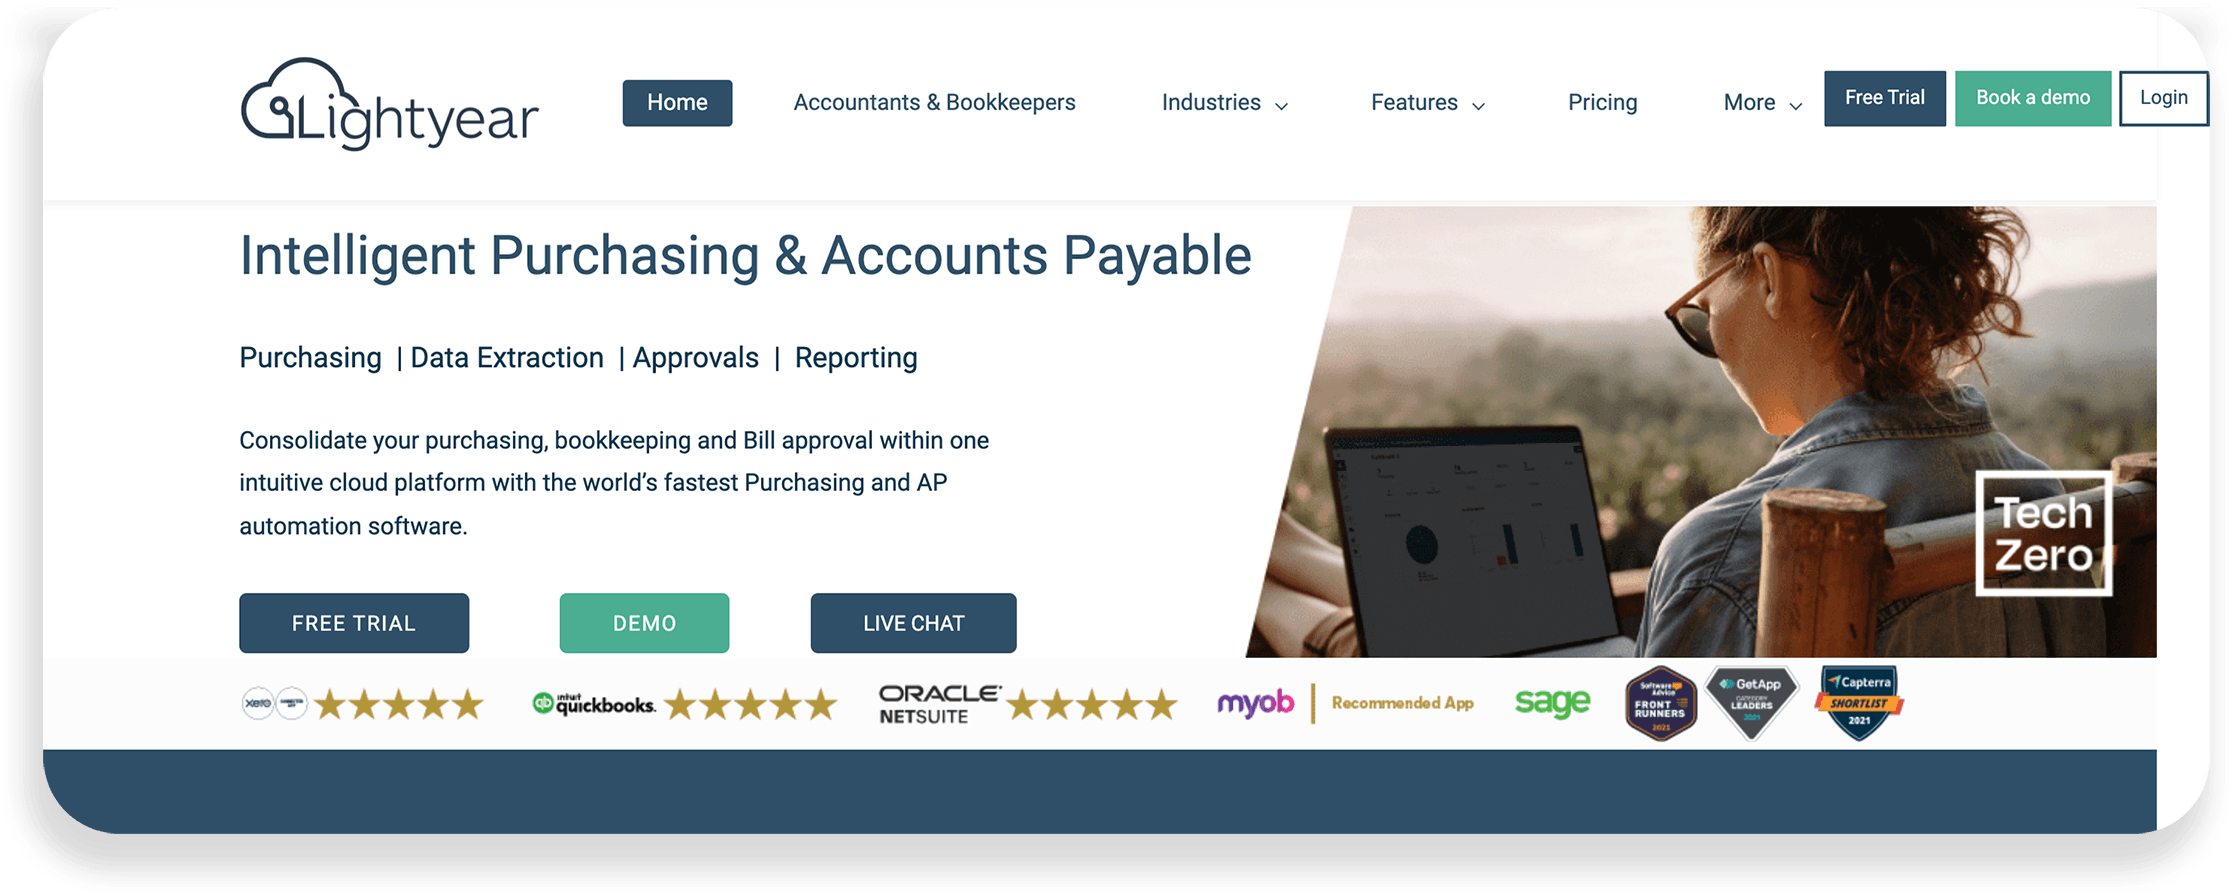 Lightyear - Purchasing and Accounts Payable Software